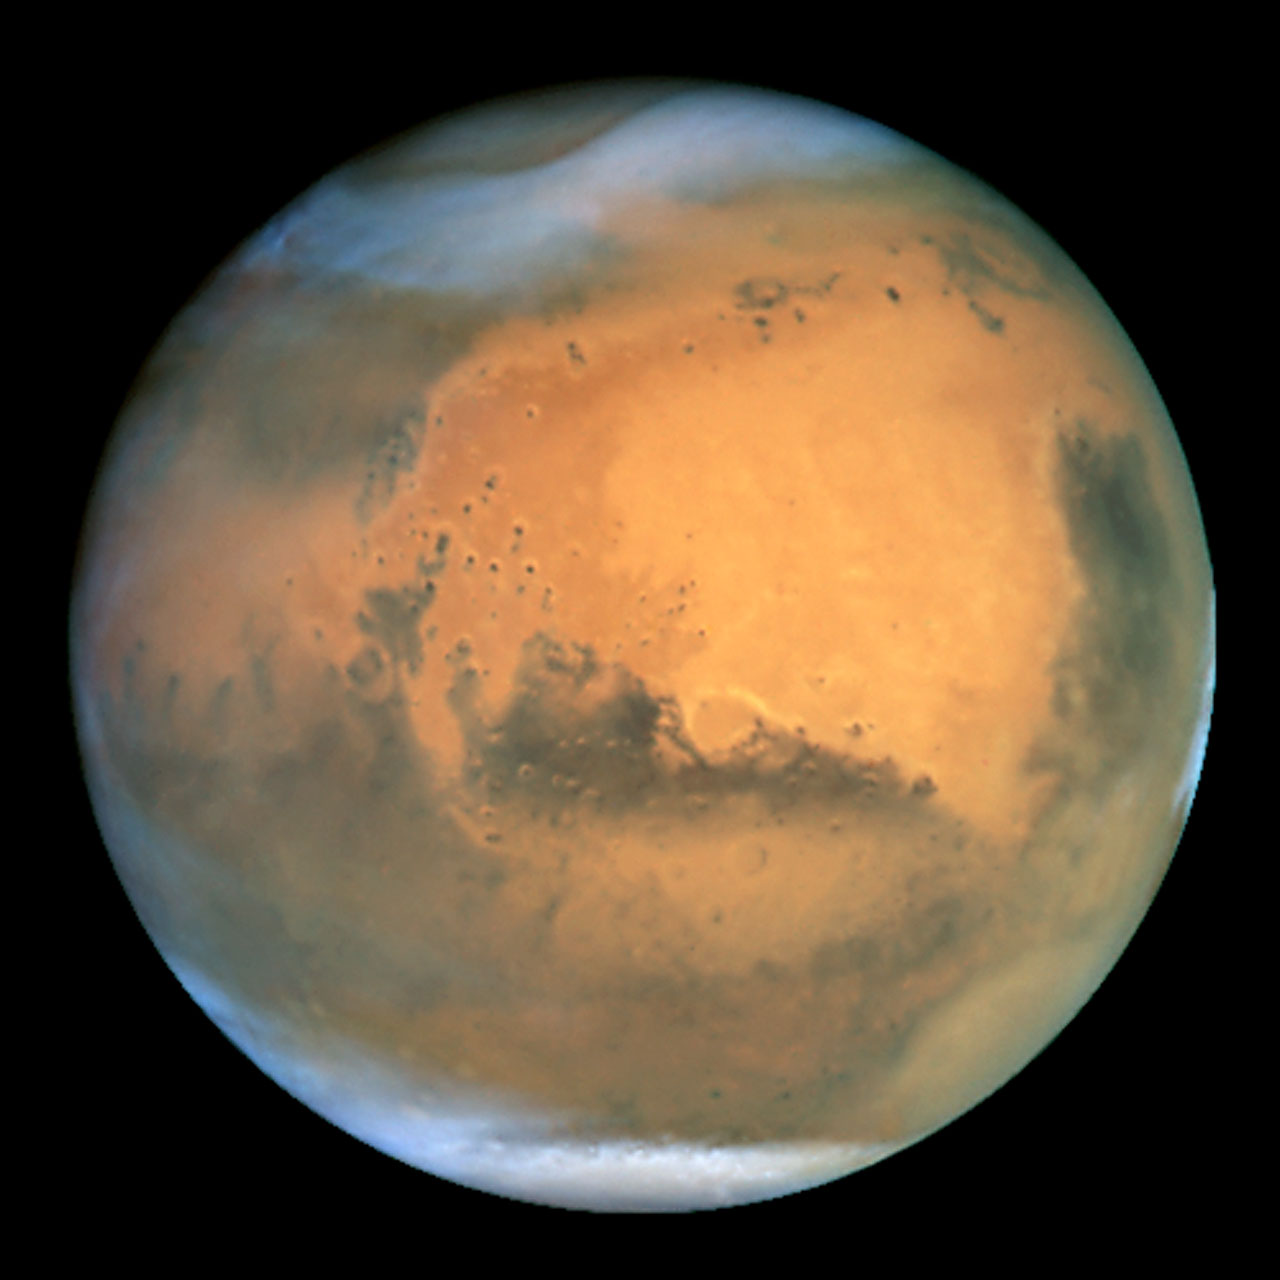 Our favorite Mars images for #MarsMonday